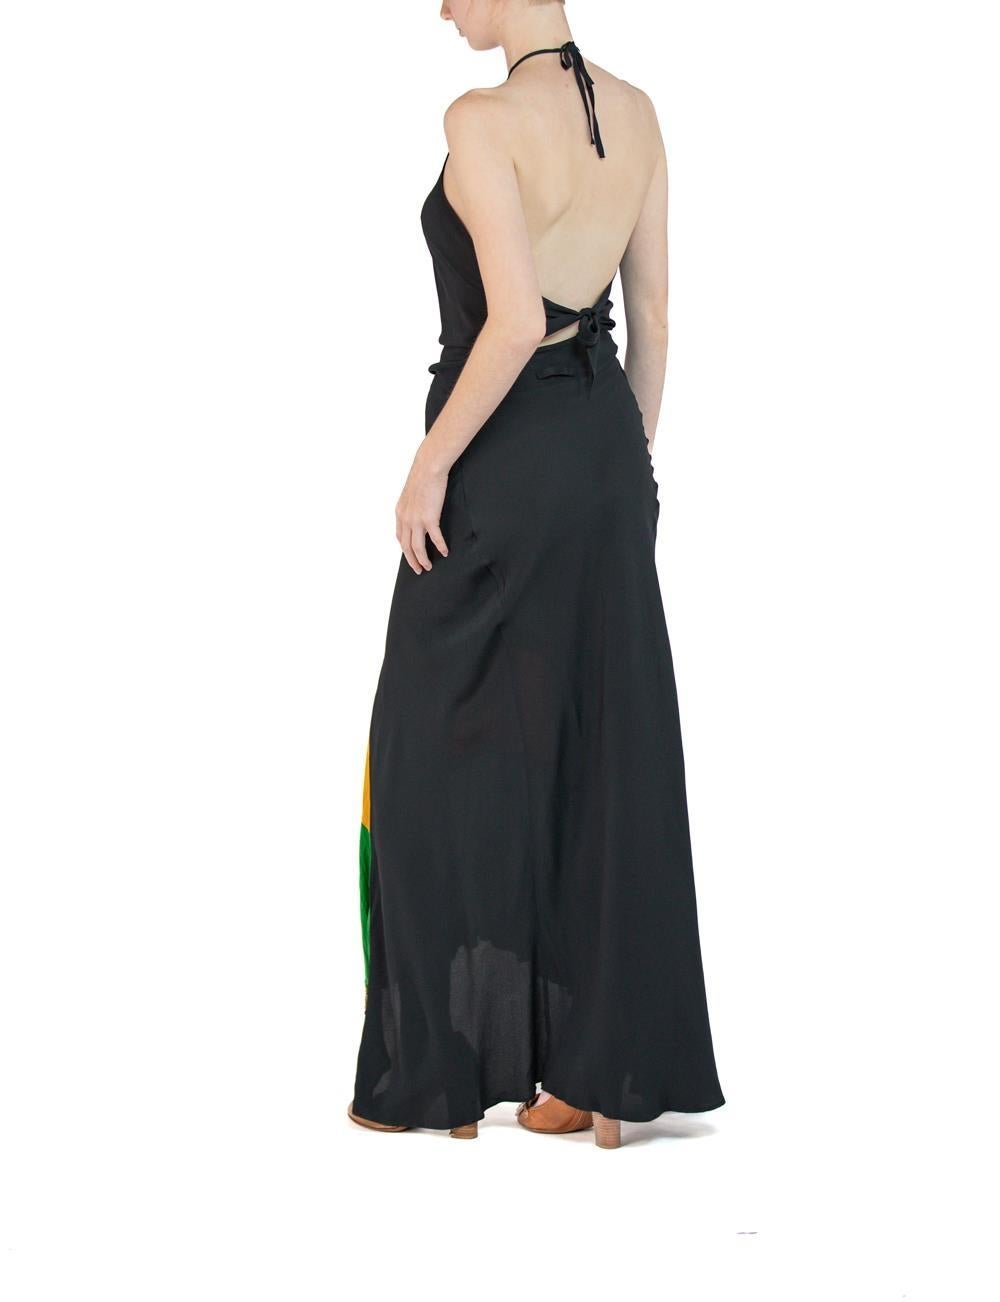 1990S FEMME BY JEAN PAUL GAULTIER Black, Yellow & Green Rayon Long Dress In Excellent Condition For Sale In New York, NY